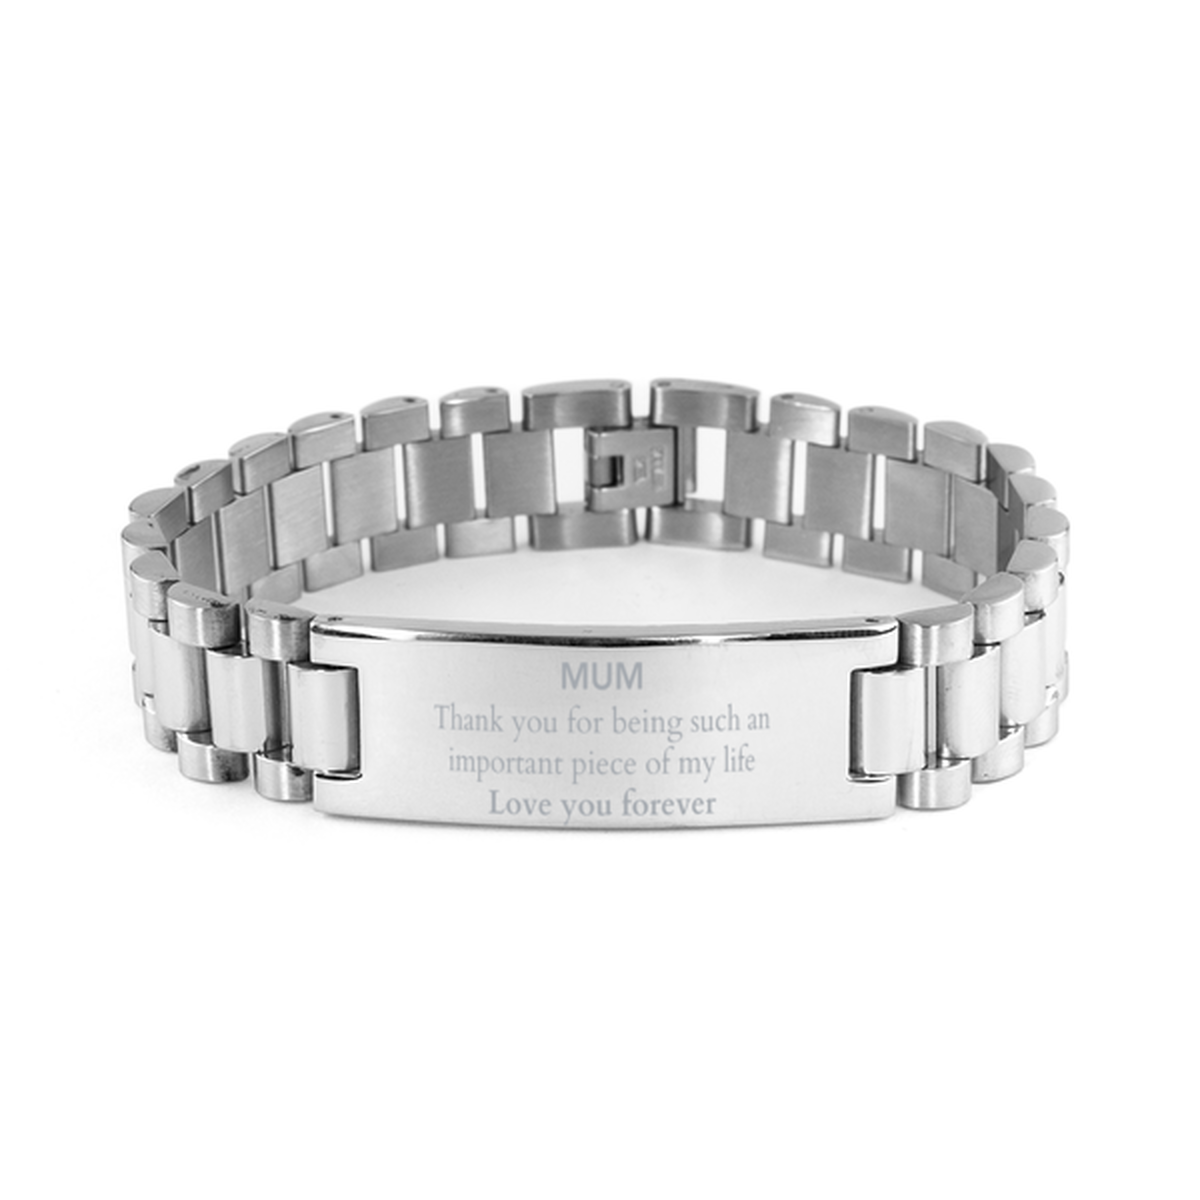 Appropriate Mum Ladder Stainless Steel Bracelet Epic Birthday Gifts for Mum Thank you for being such an important piece of my life Mum Christmas Mothers Fathers Day